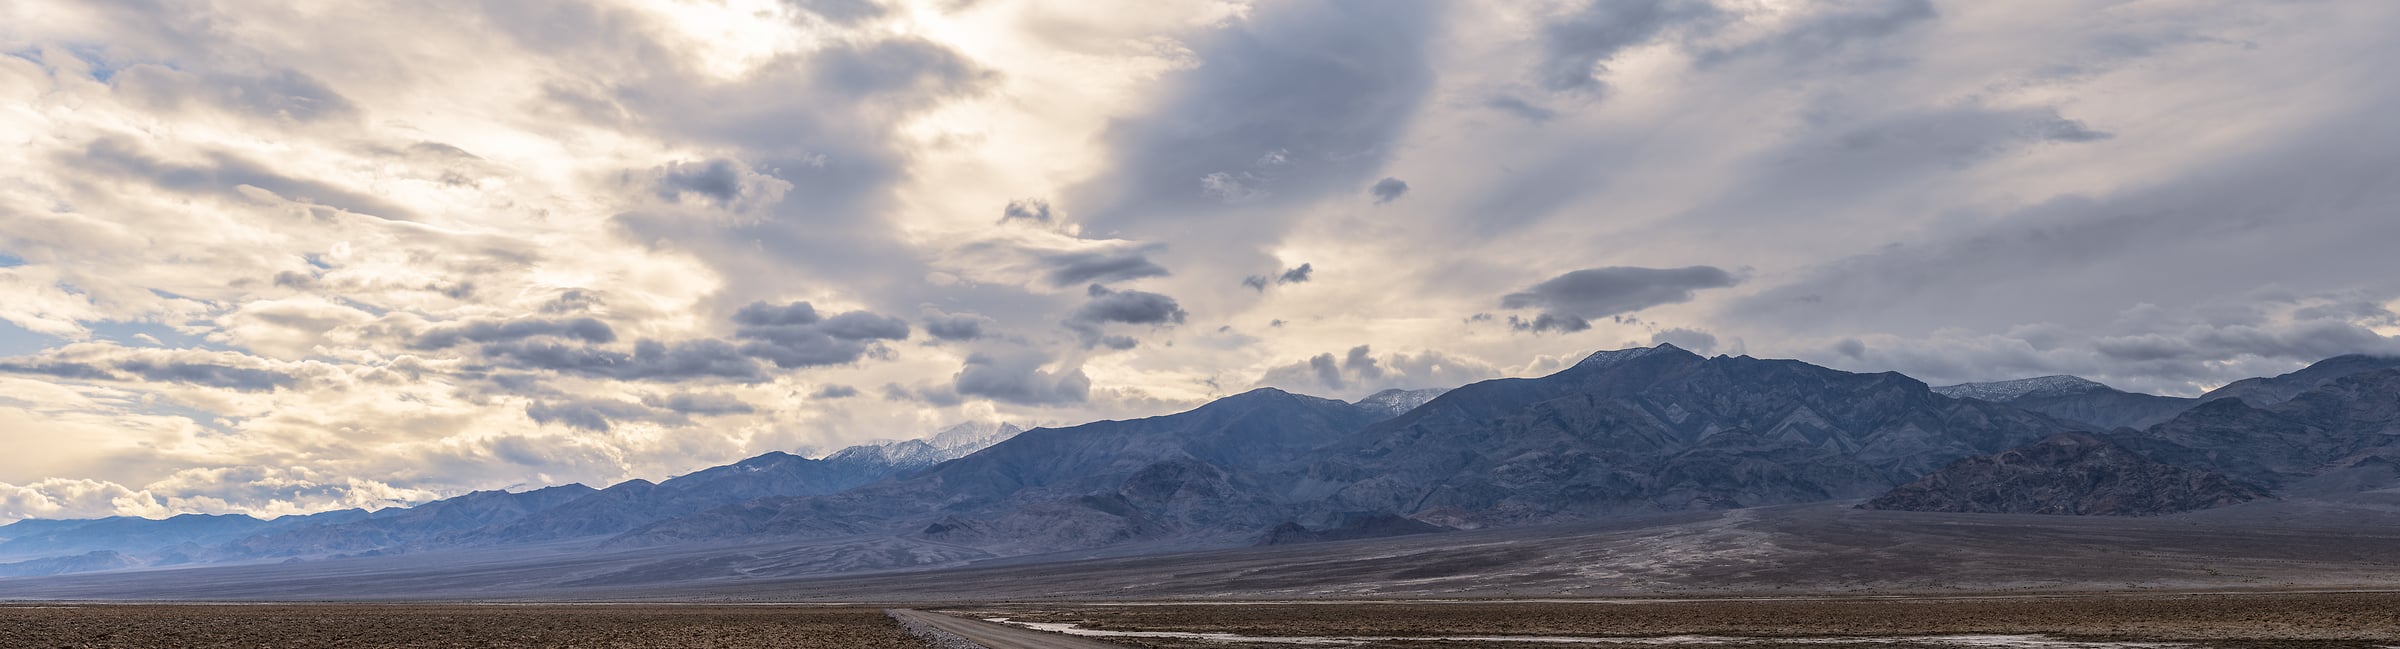 614 megapixels! A very high resolution, large-format VAST photo print of West Road in Death Valley with epic clouds; landscape photograph created by Chris Blake in Death Valley National Park, California.